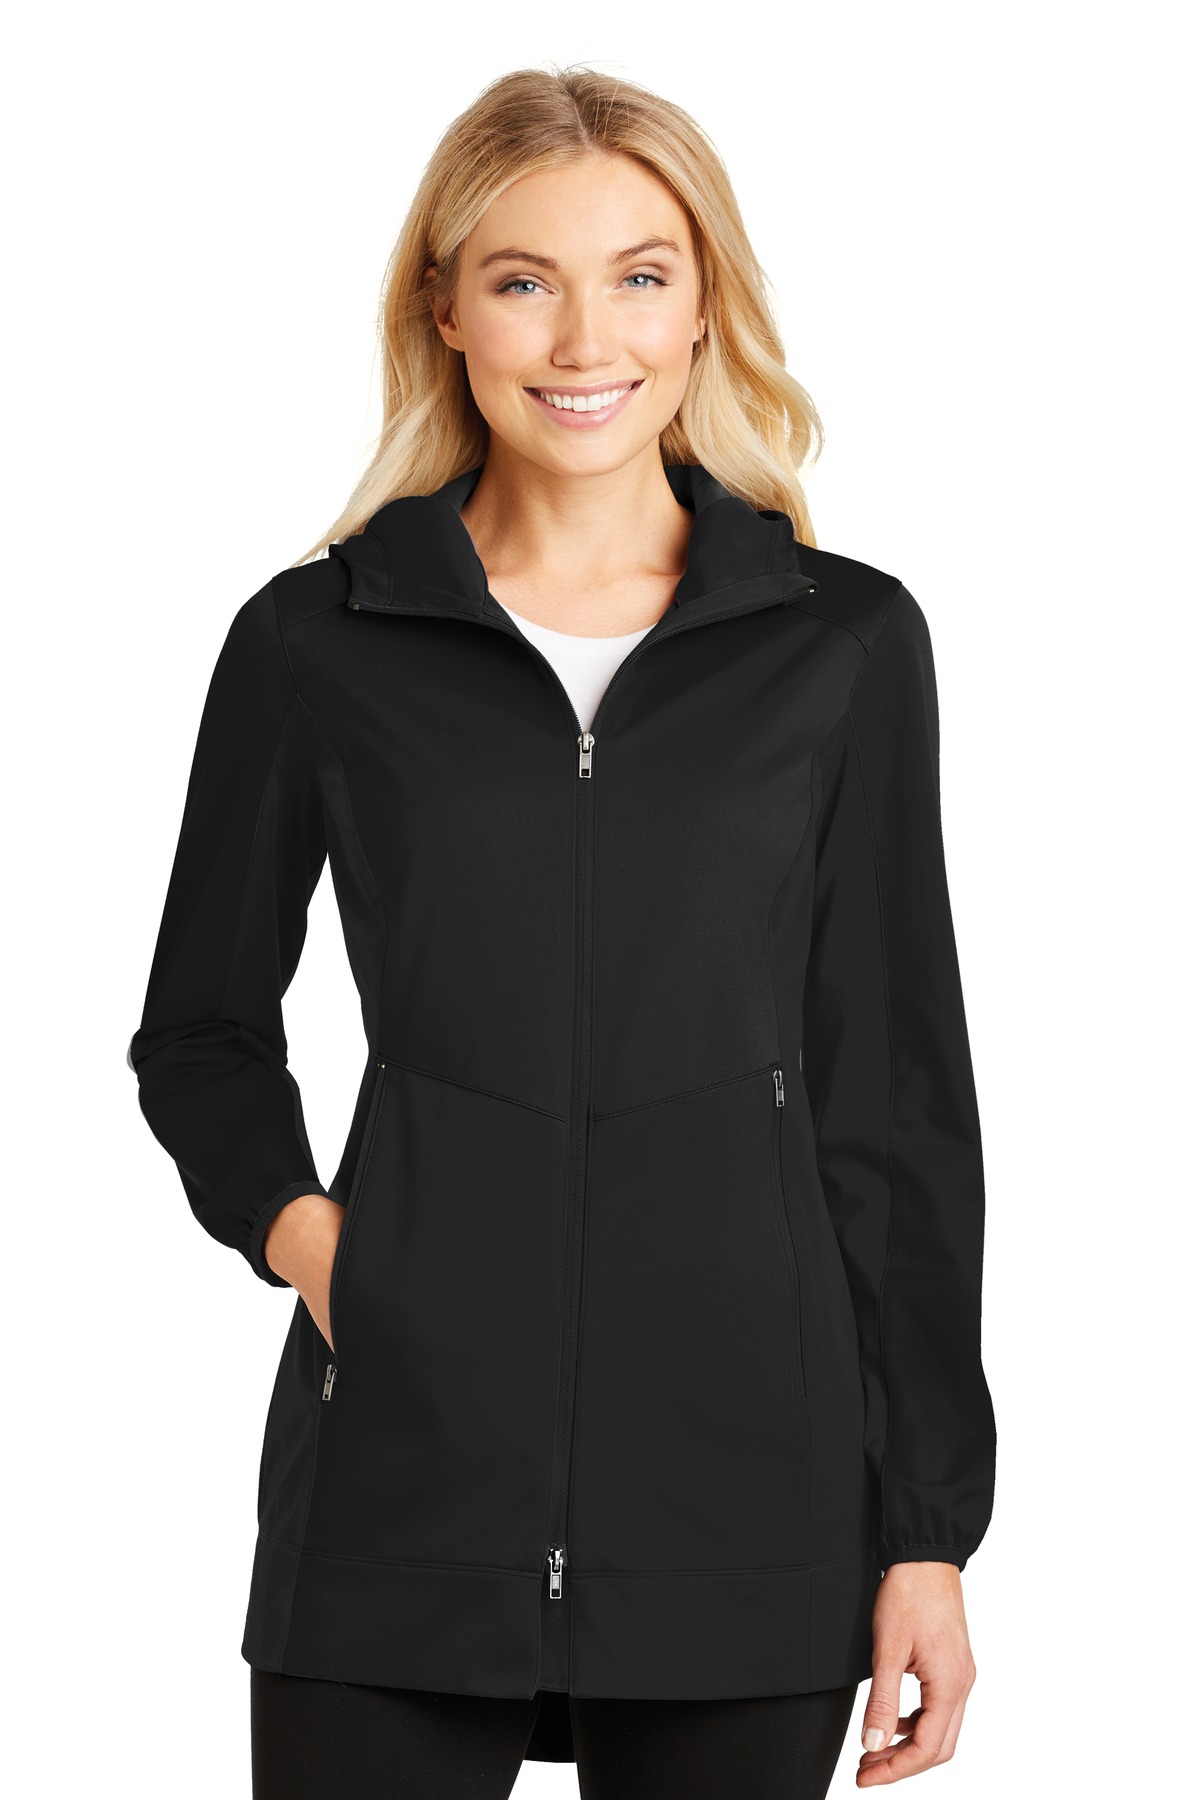 Port Authority Ladies Active Hooded Soft Shell Jacket-XS (Deep Black) - image 1 of 6